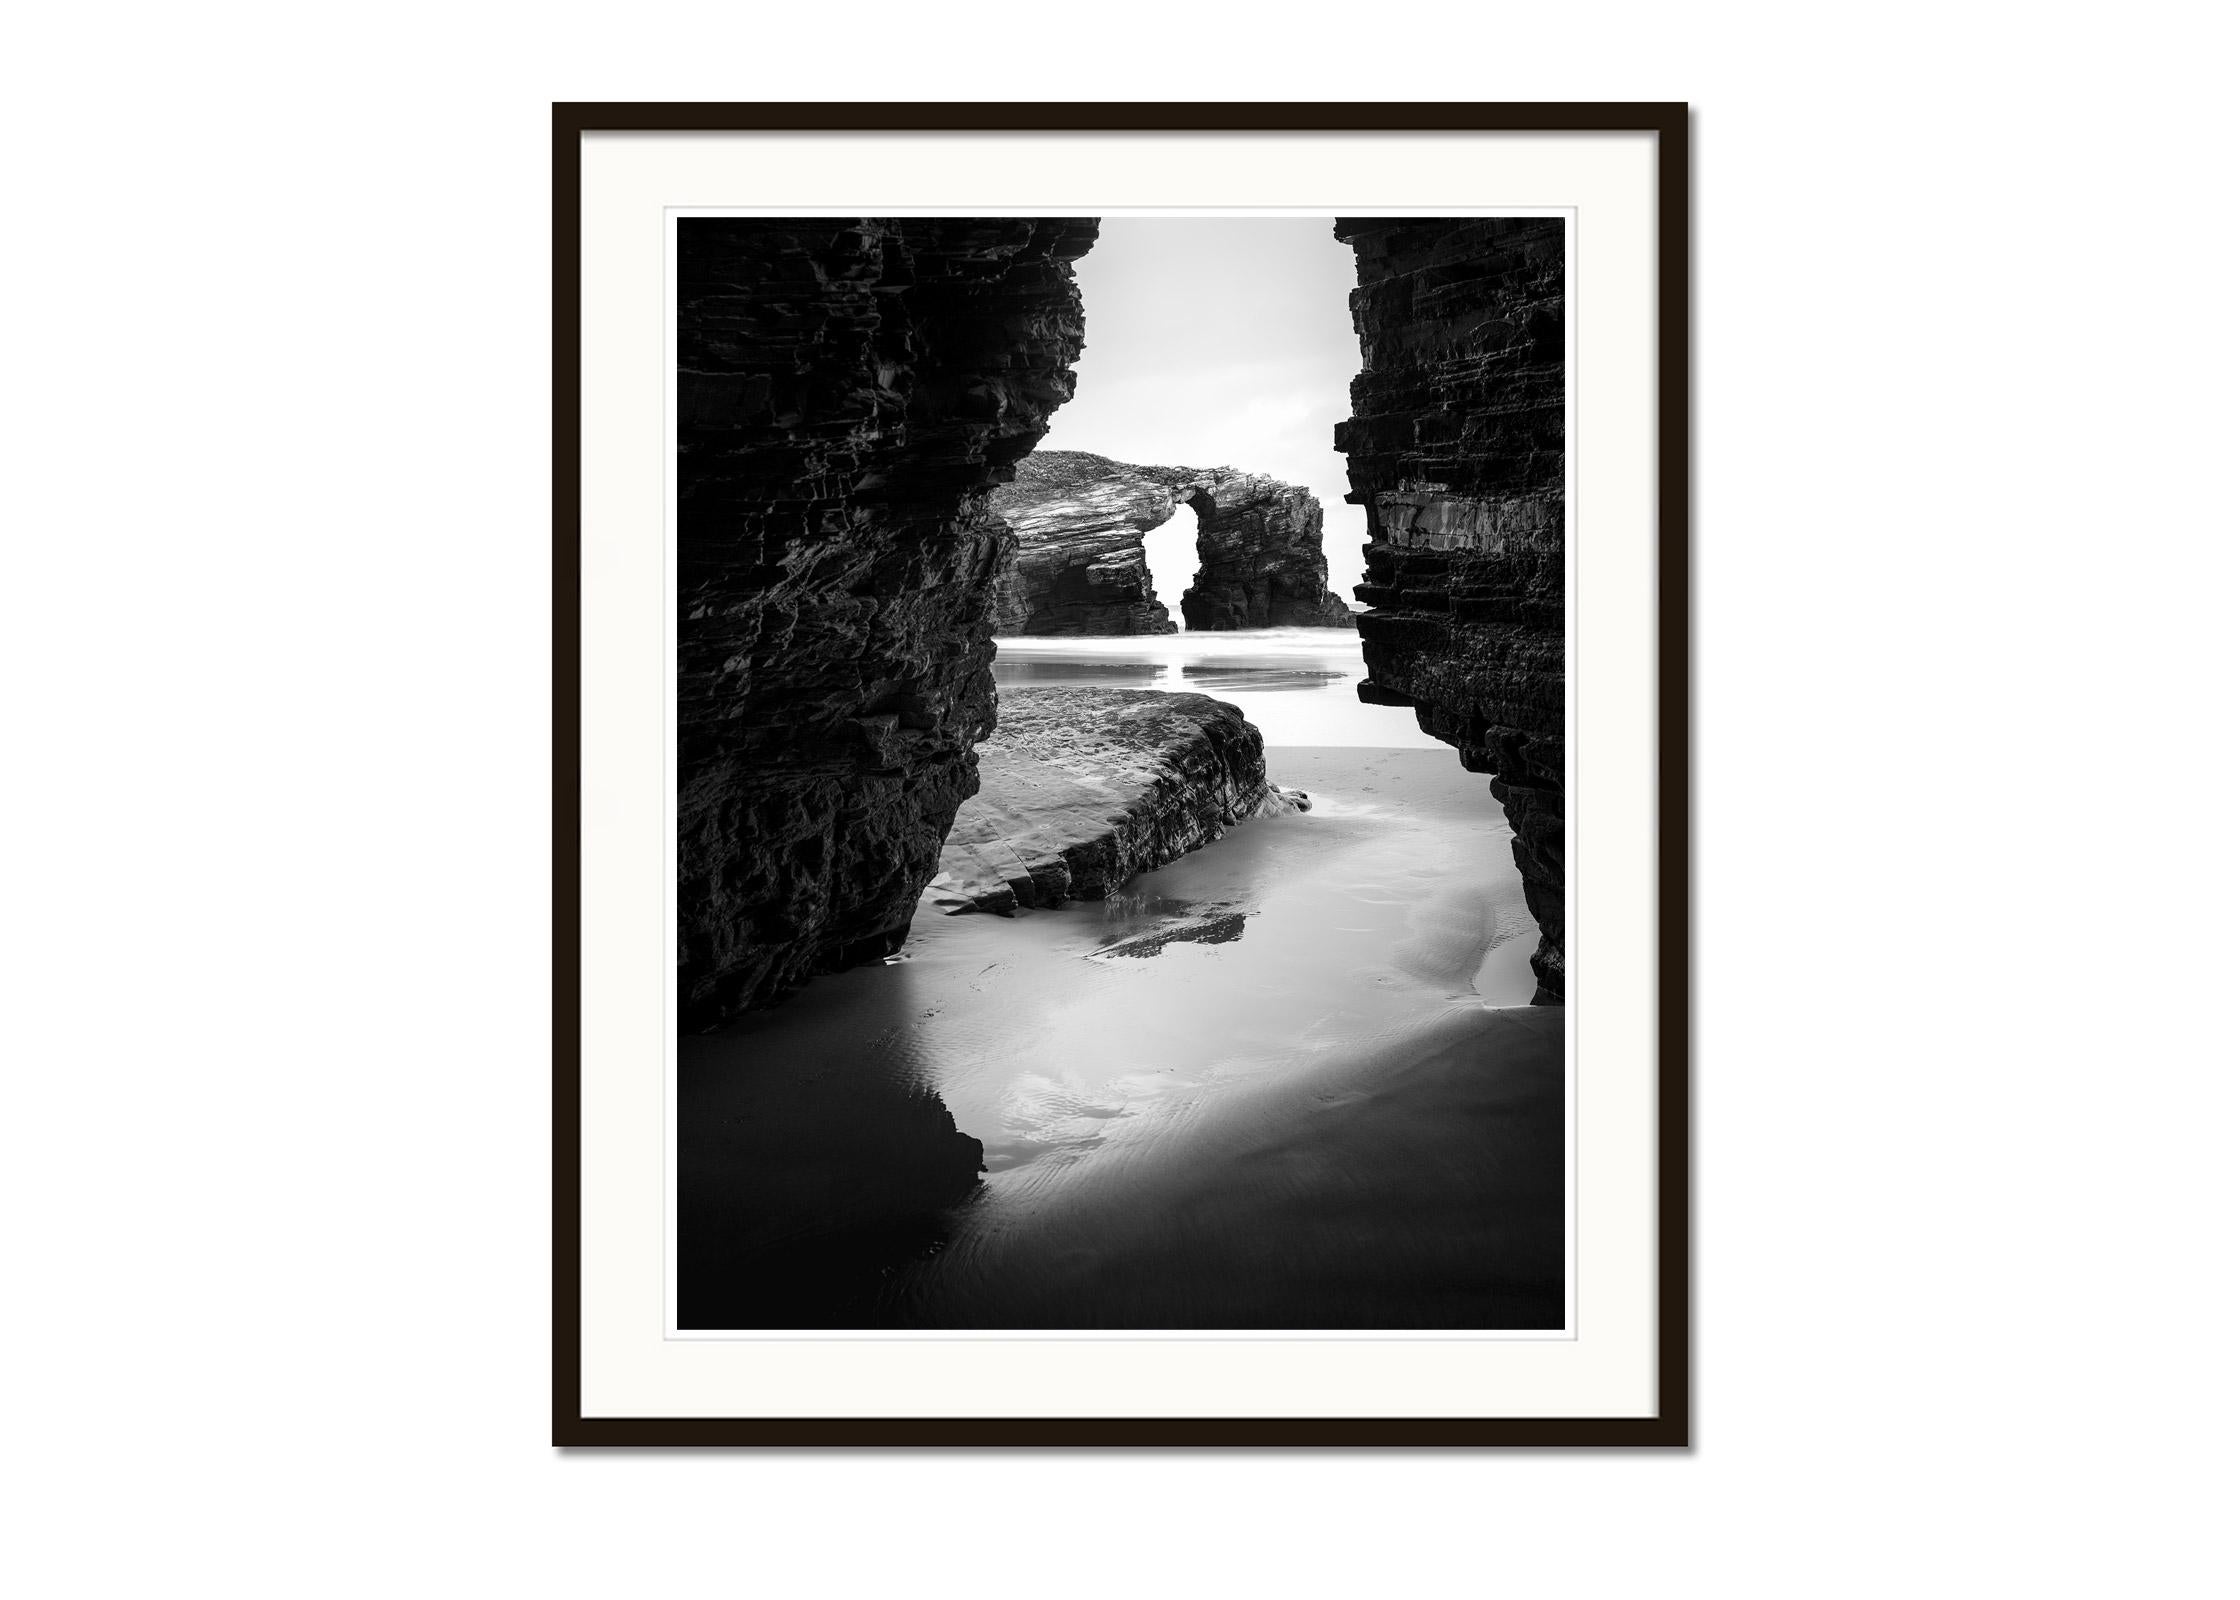 Black and white fine art long exposure waterscape - landscape photography. Archival pigment ink print as part of a limited edition of 8. All Gerald Berghammer prints are made to order in limited editions on Hahnemuehle Photo Rag Baryta. Each print